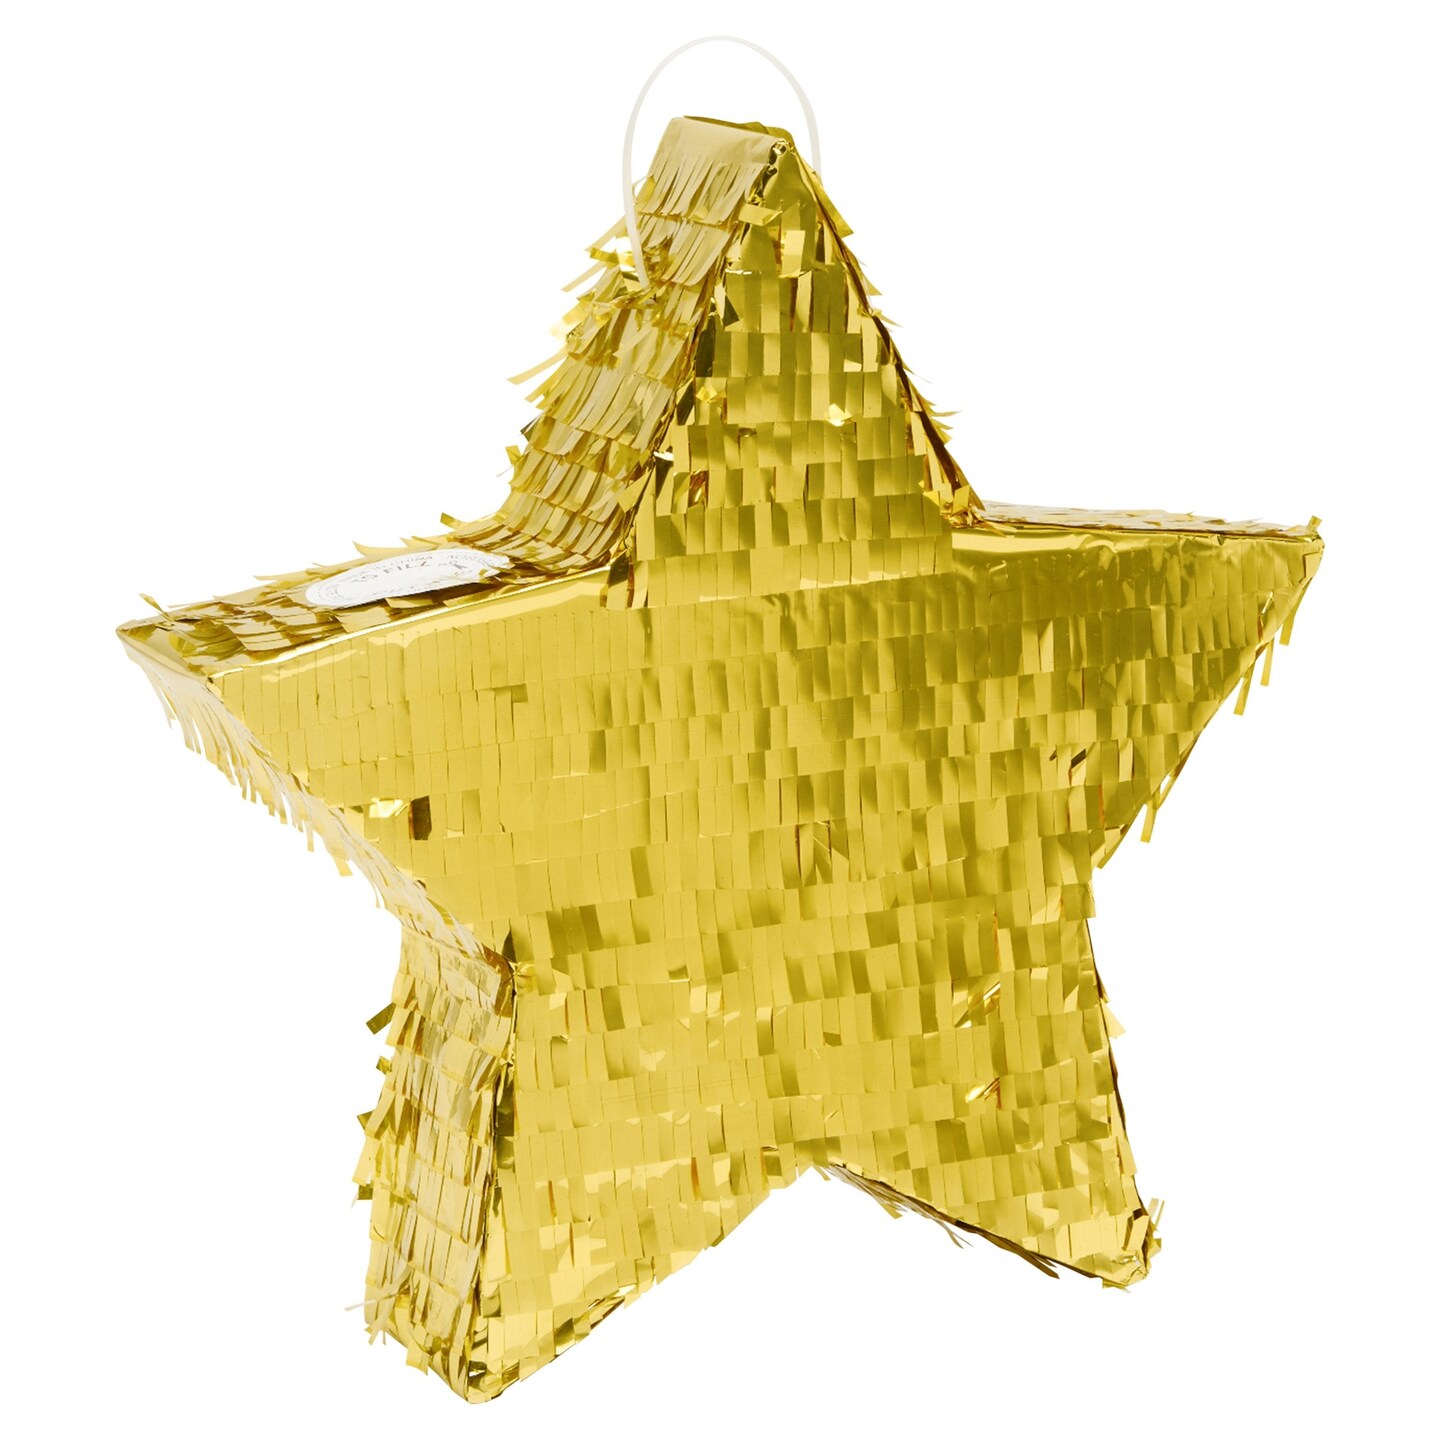 Small Gold Star Pinata for Kids Birthday, Twinkle Twinkle Little Star Gender Reveal Party Decorations, Baby Shower (13 x 3 In)